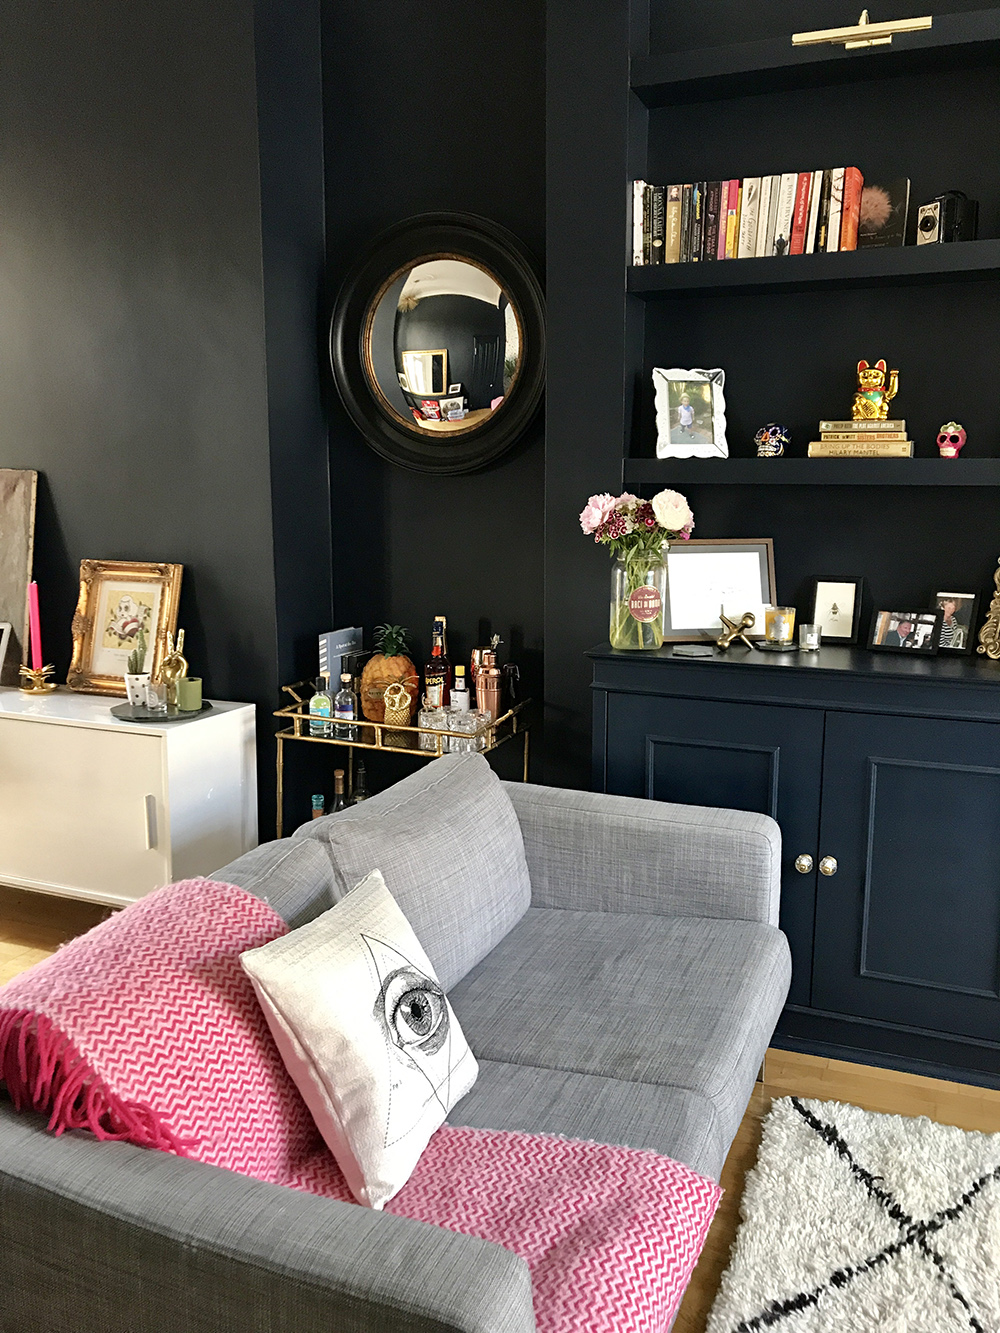 After: Living room makeover. Quirky and stylish home accessories give this dark and moody living room the wow factor. The walls are painted in Basalt by Little Greene, which works great with gold accents.